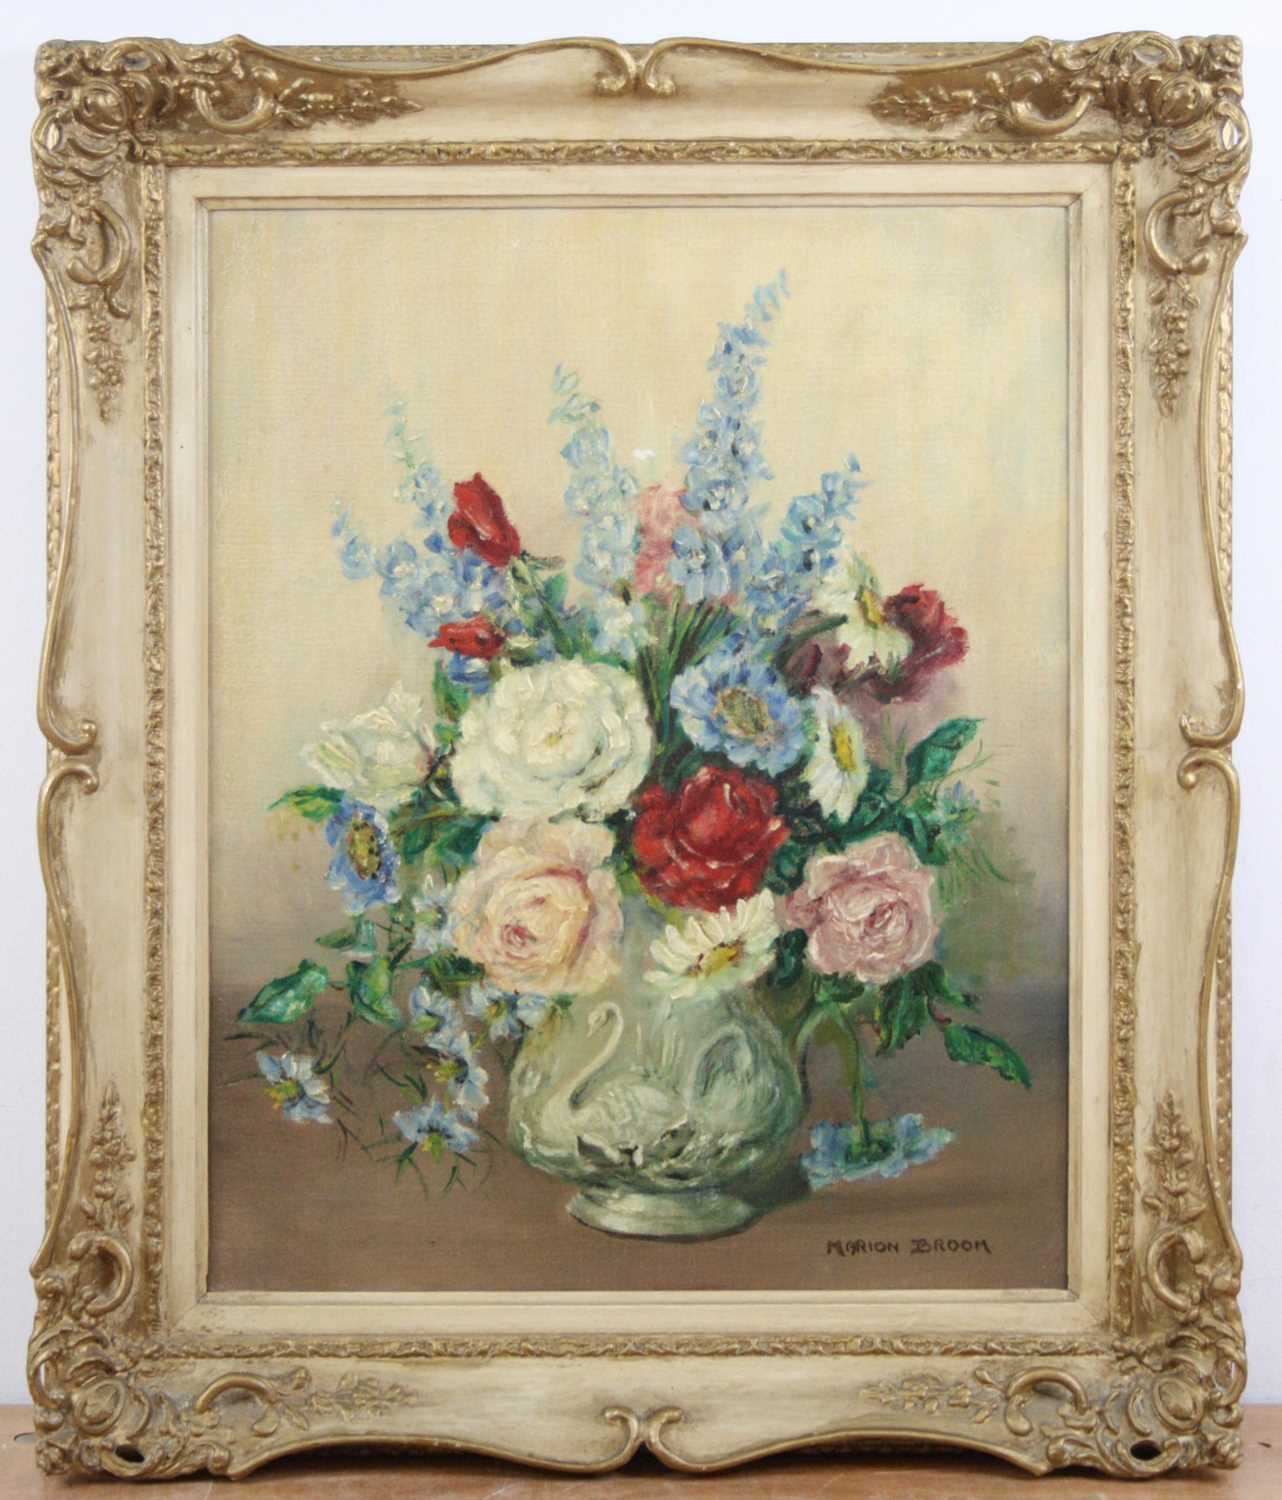 Marion Broom (1878-1962) - Still life flowers in a vase, oil on canvas, signed lower right, 51 x - Image 2 of 4